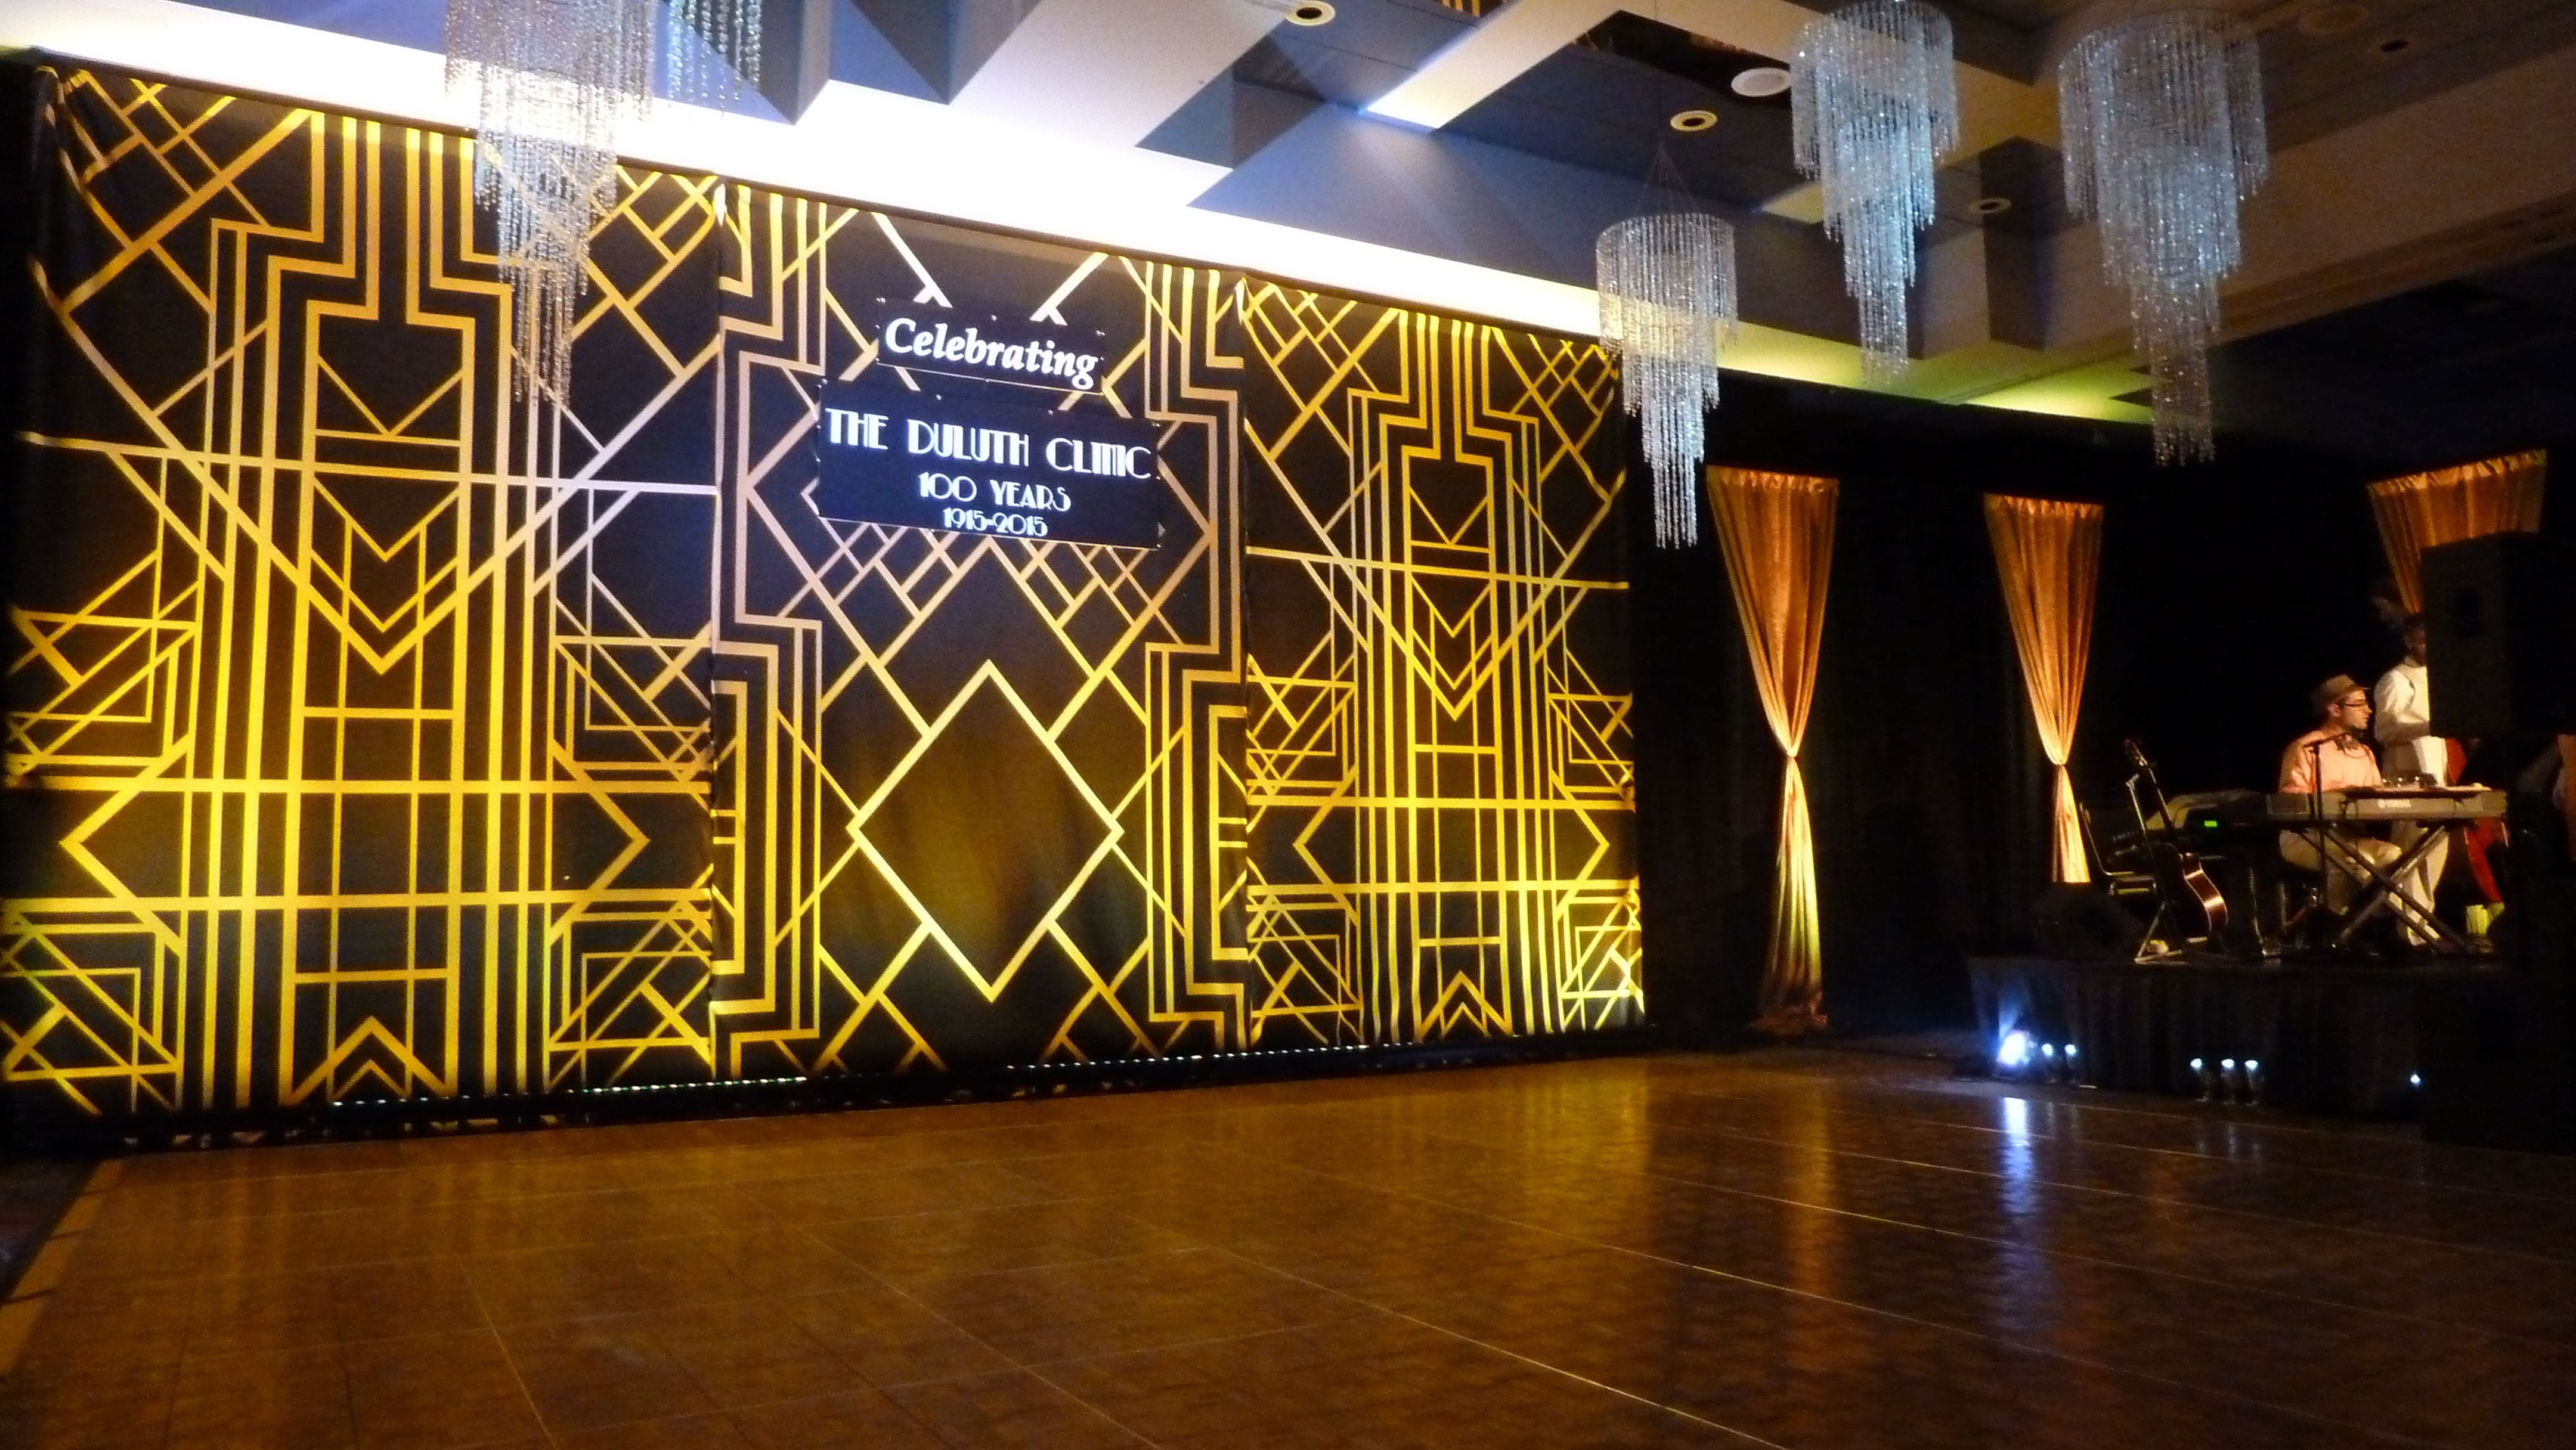 Art Deco themed decor provided by Event Lab. Lighting by Duluth Event Lighting.